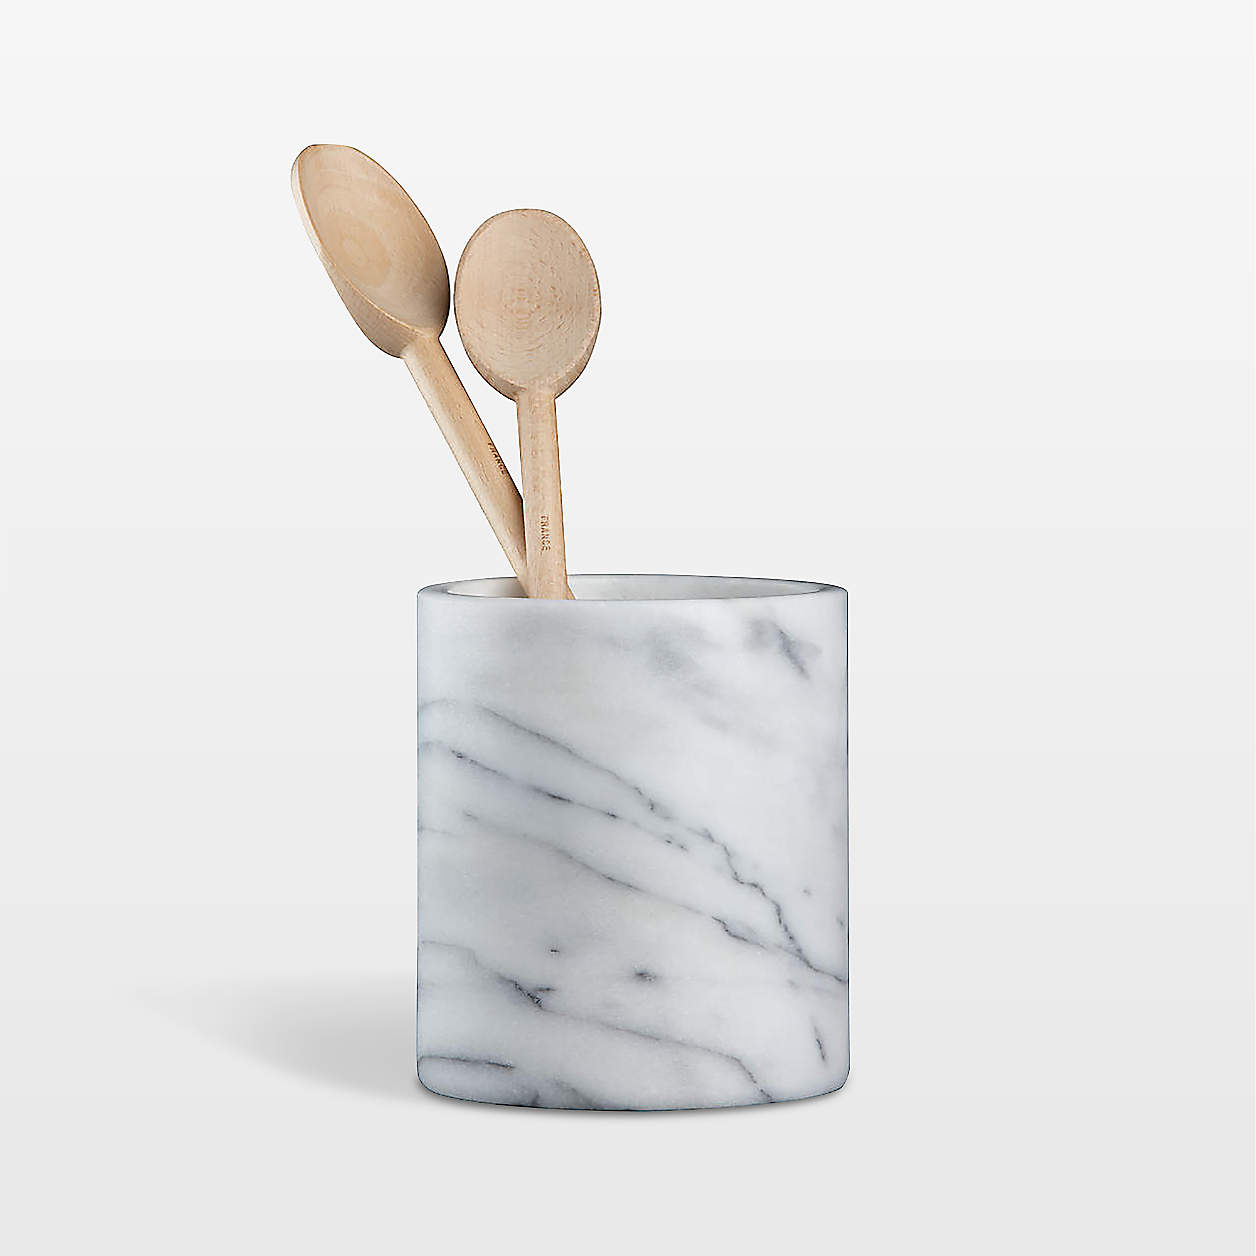 (We will buy in india) French Kitchen Marble Utensil Holder